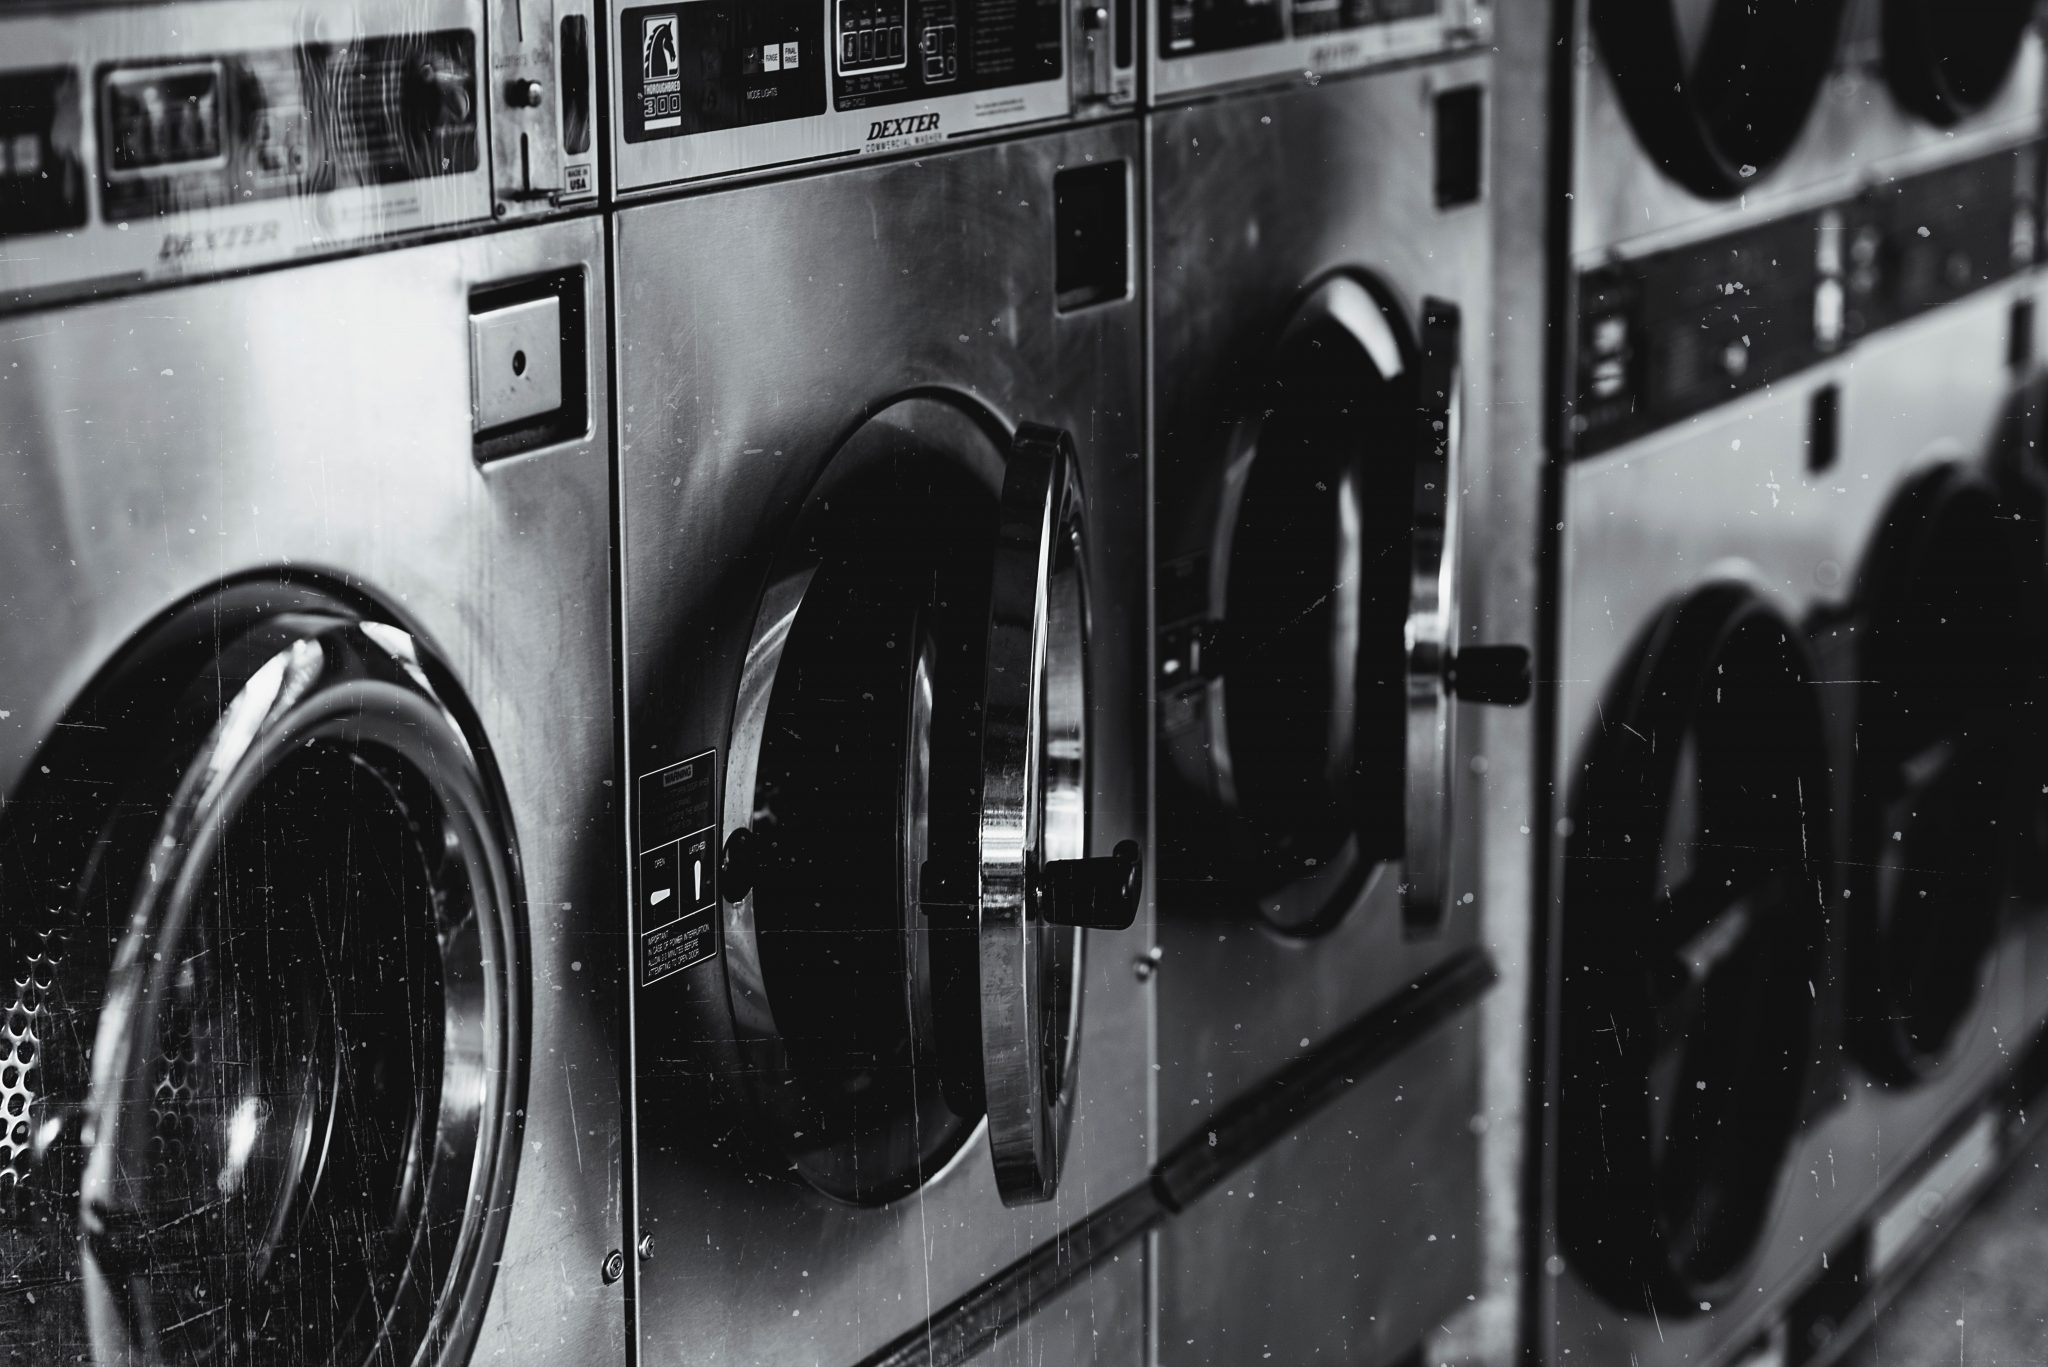 33 Places Who Buy Used Appliances [Near You]: Earn Cash ...